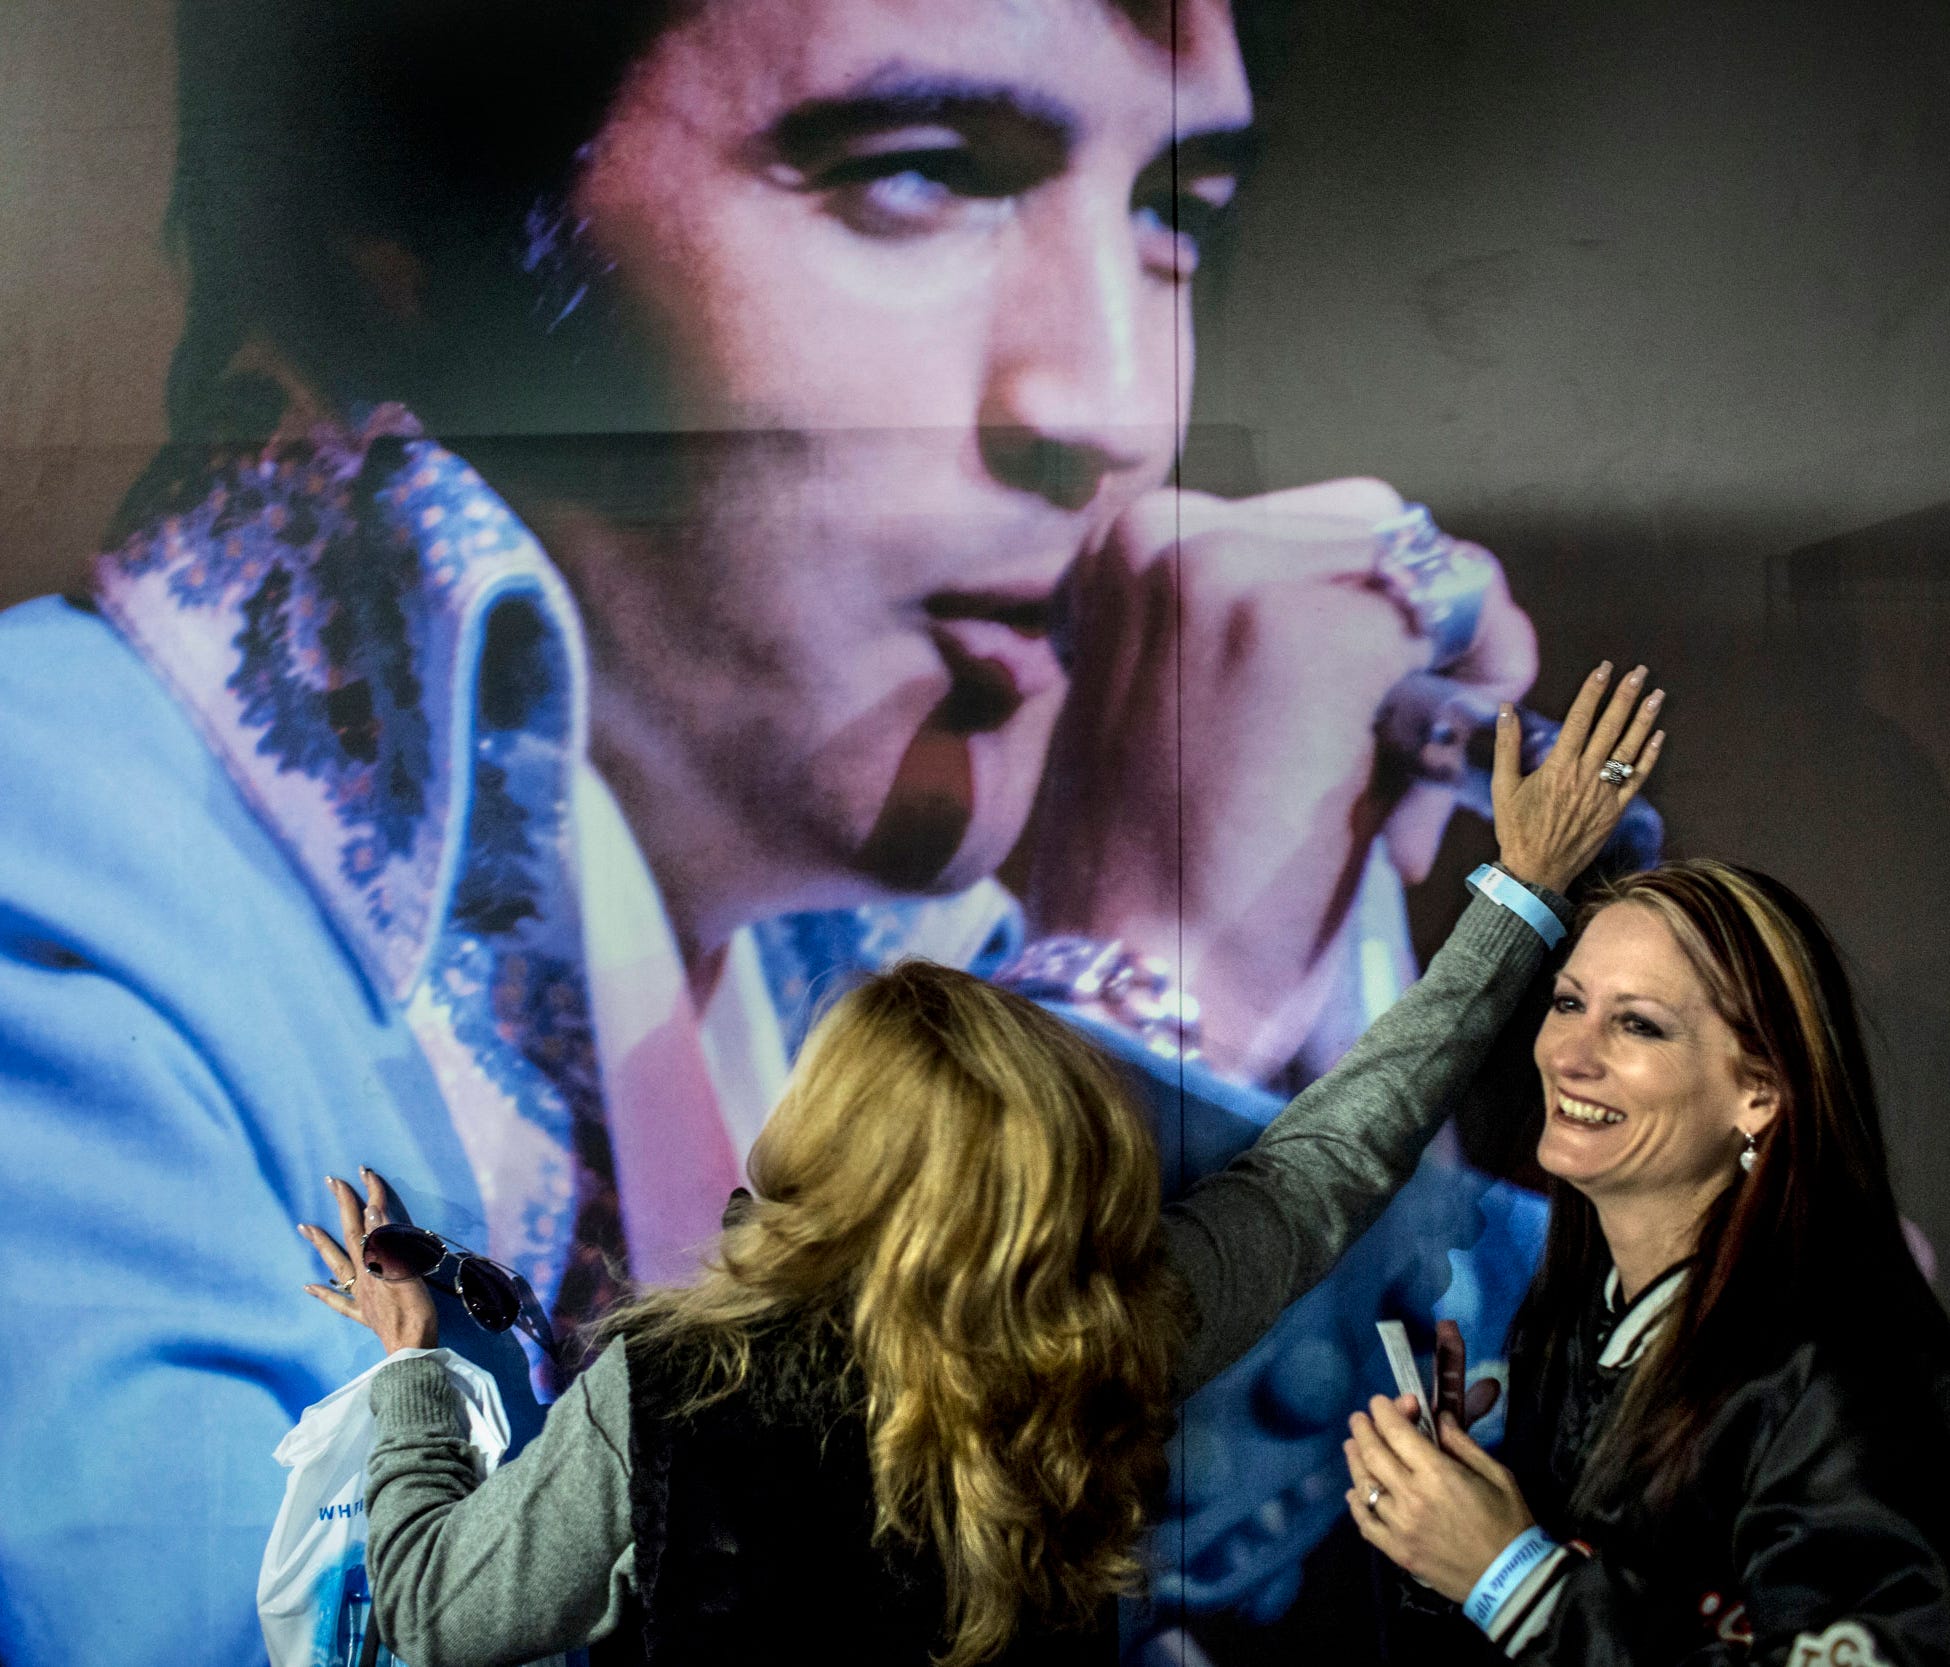 March 2, 2017 - Shelley Dorazio, left, embraces a picture of Elvis Presley while Jenny Furr laughs inside of the new Elvis Presley's Memphis. Elvis Presley Enterprises opened 200,000 square feet of new exhibits, museums and performance space behind G